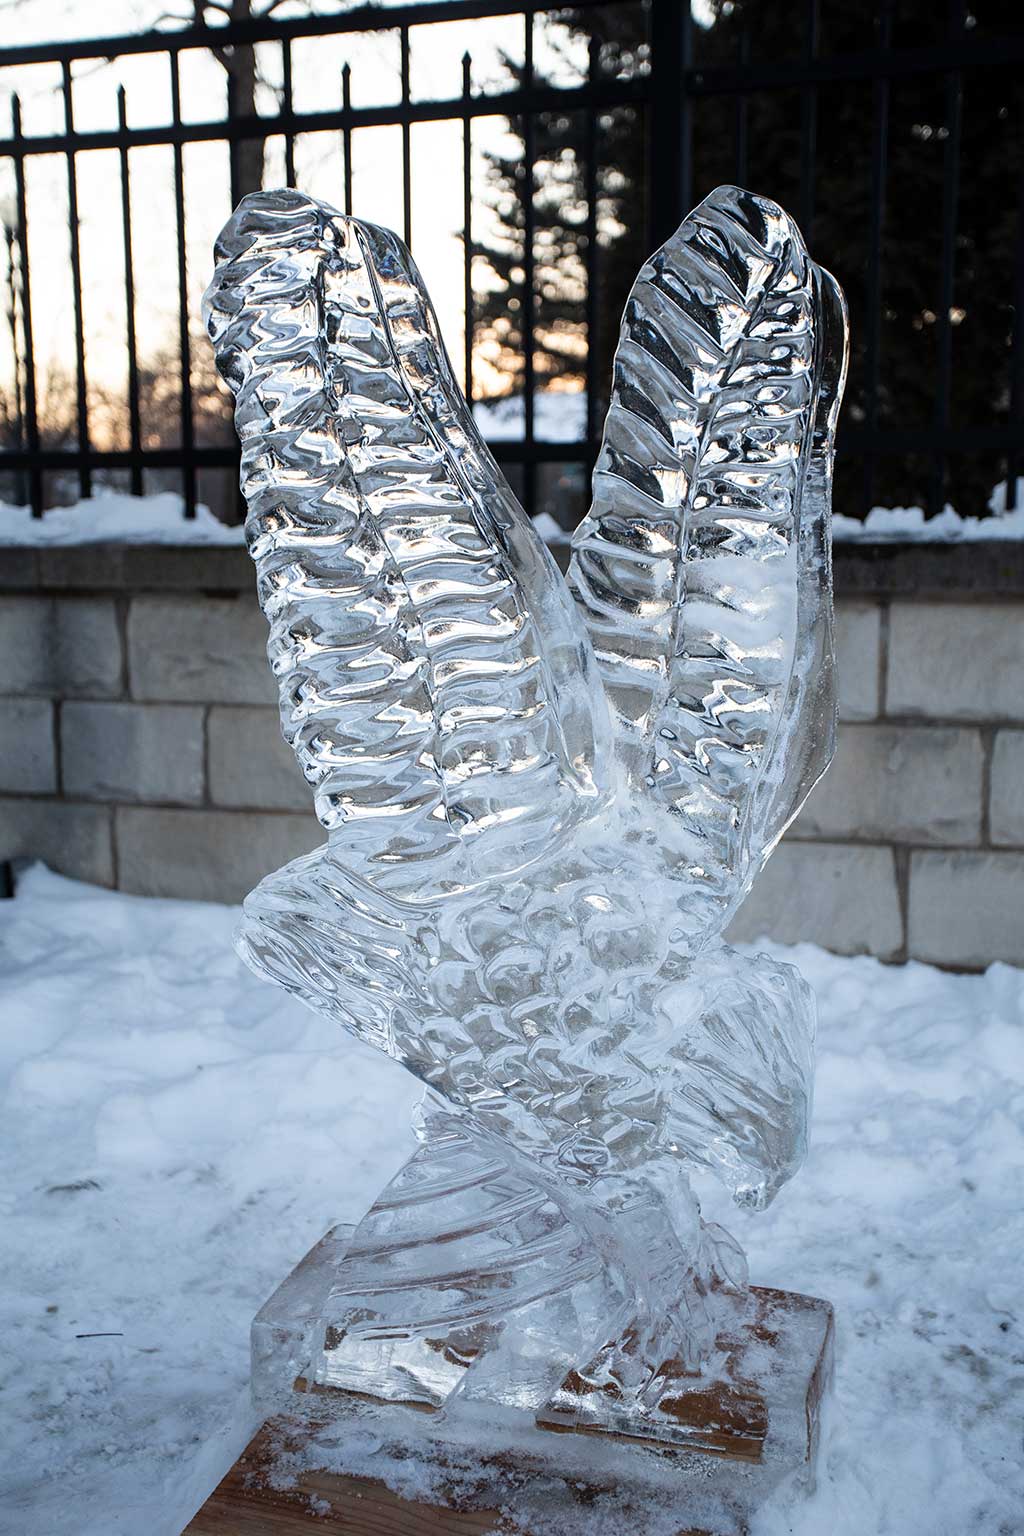 drive-swim-fly-downers-grove-chicago-illinois-ice-sculpture-downtown-businesses-eagle